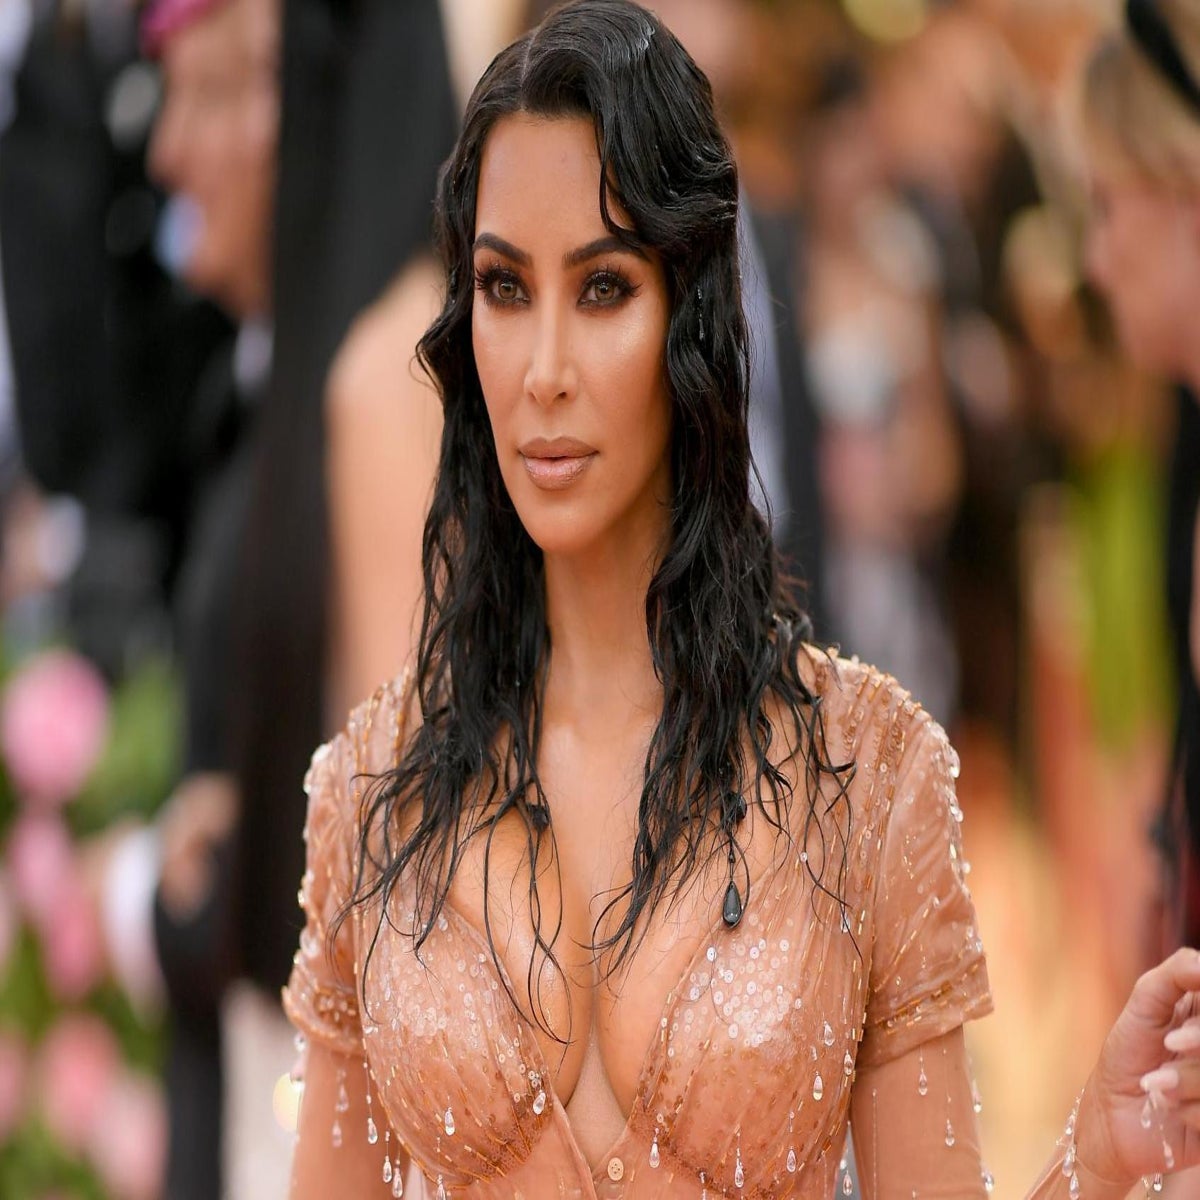 Kim Kardashian describes anxiety over tight dress in new Met Gala video |  The Independent | The Independent